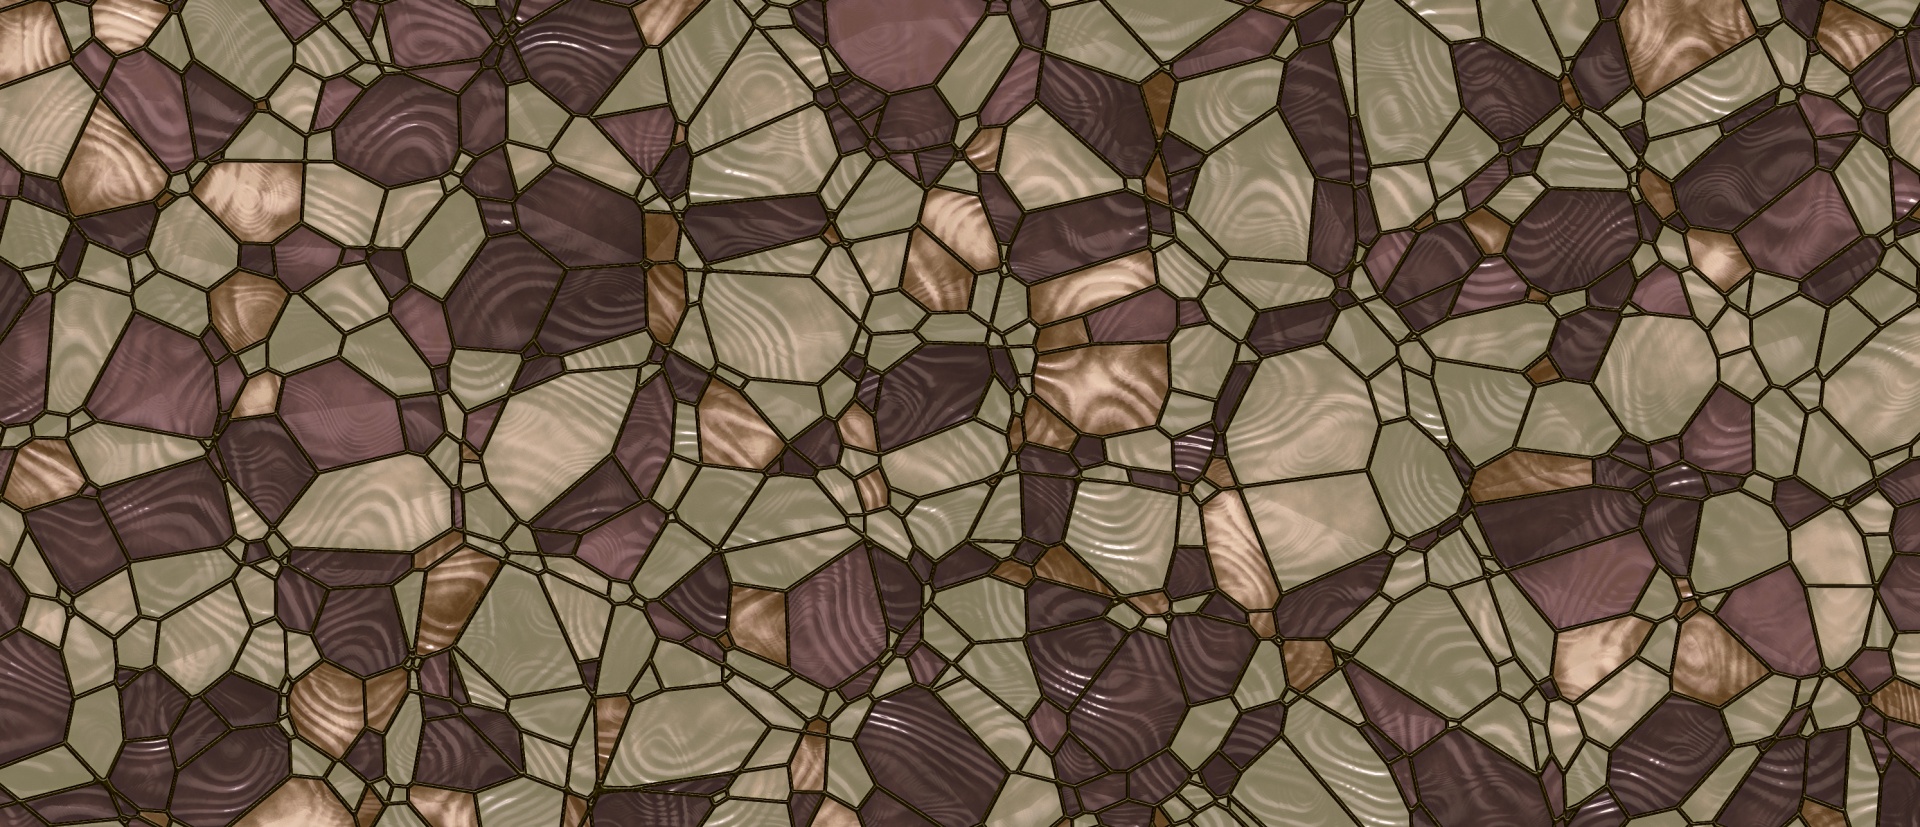 Autumn Stained Glass Banner